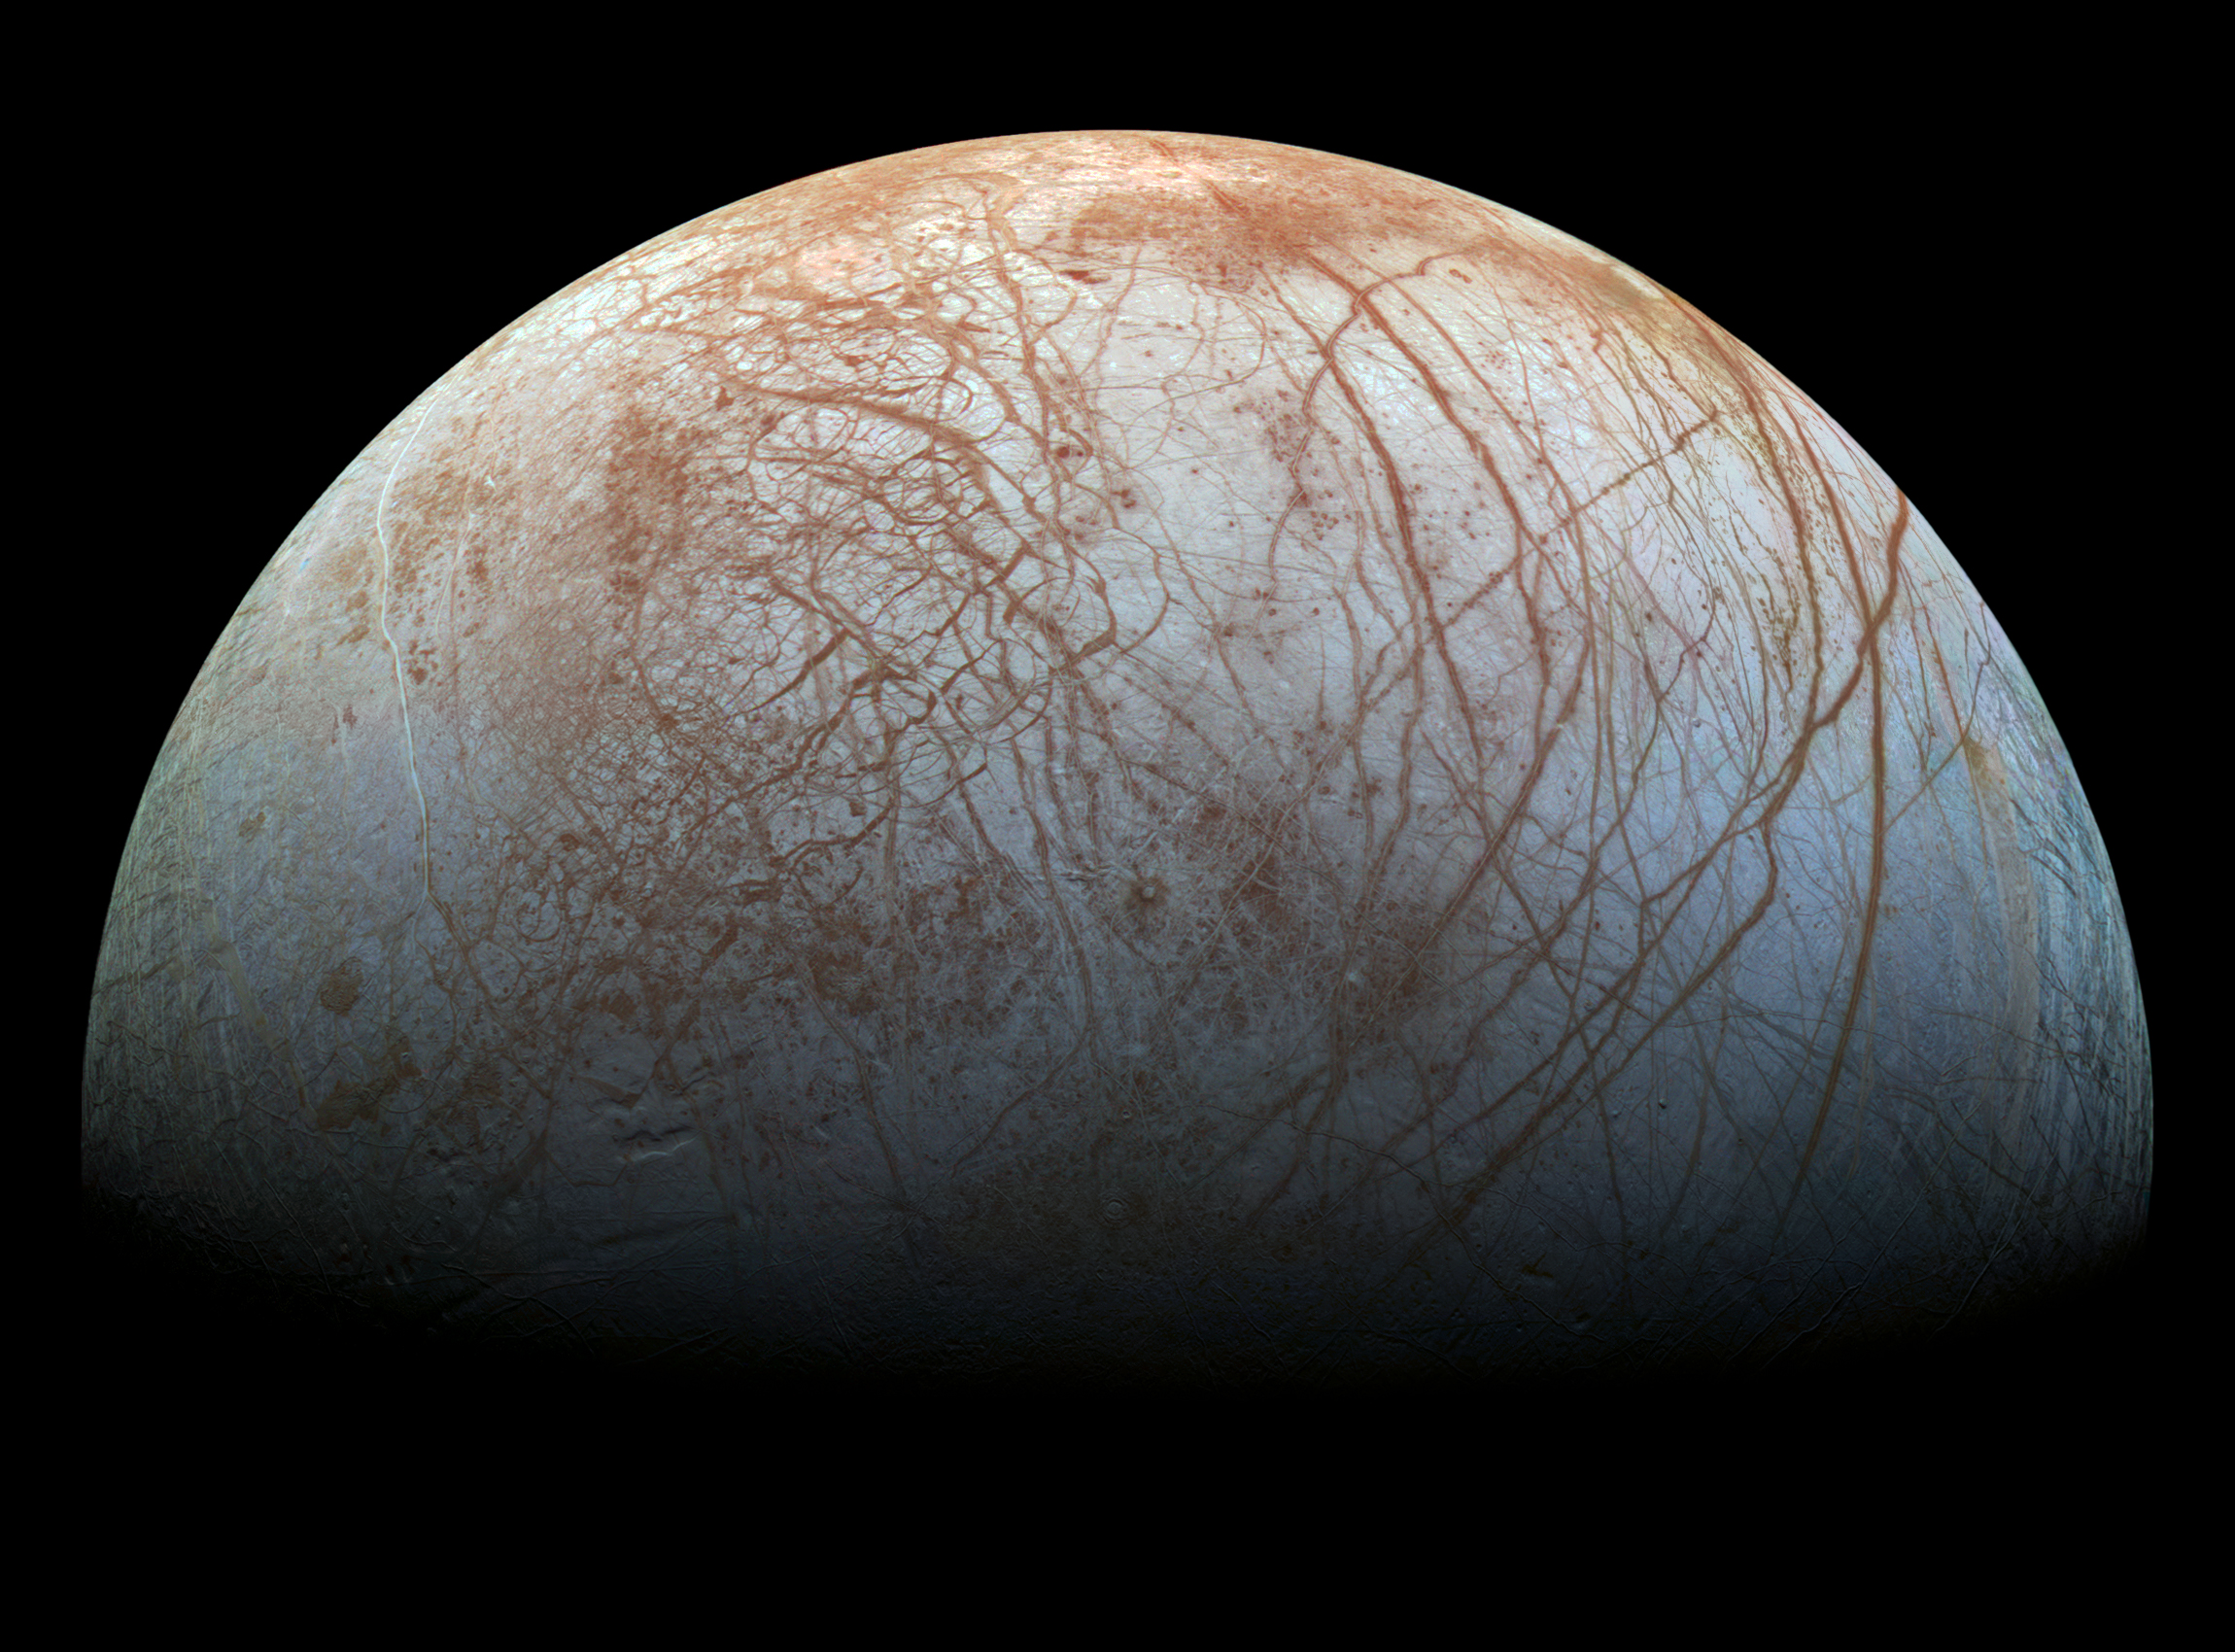 Europa is visible as a half-sphere resting upon the dark black background of space. Europa's surface is off-white in color, with a slight blueish hue. Long, dark rusty lines are visible across the surface of the moon. On the left side of the moon, the lines are in a visibly tighter patterns, and on the right side of the moon the lines are deeper and extend across the length of the moon in long curving acs. As more of the moon is visible at the bottom of the image, it fades into darkness. 